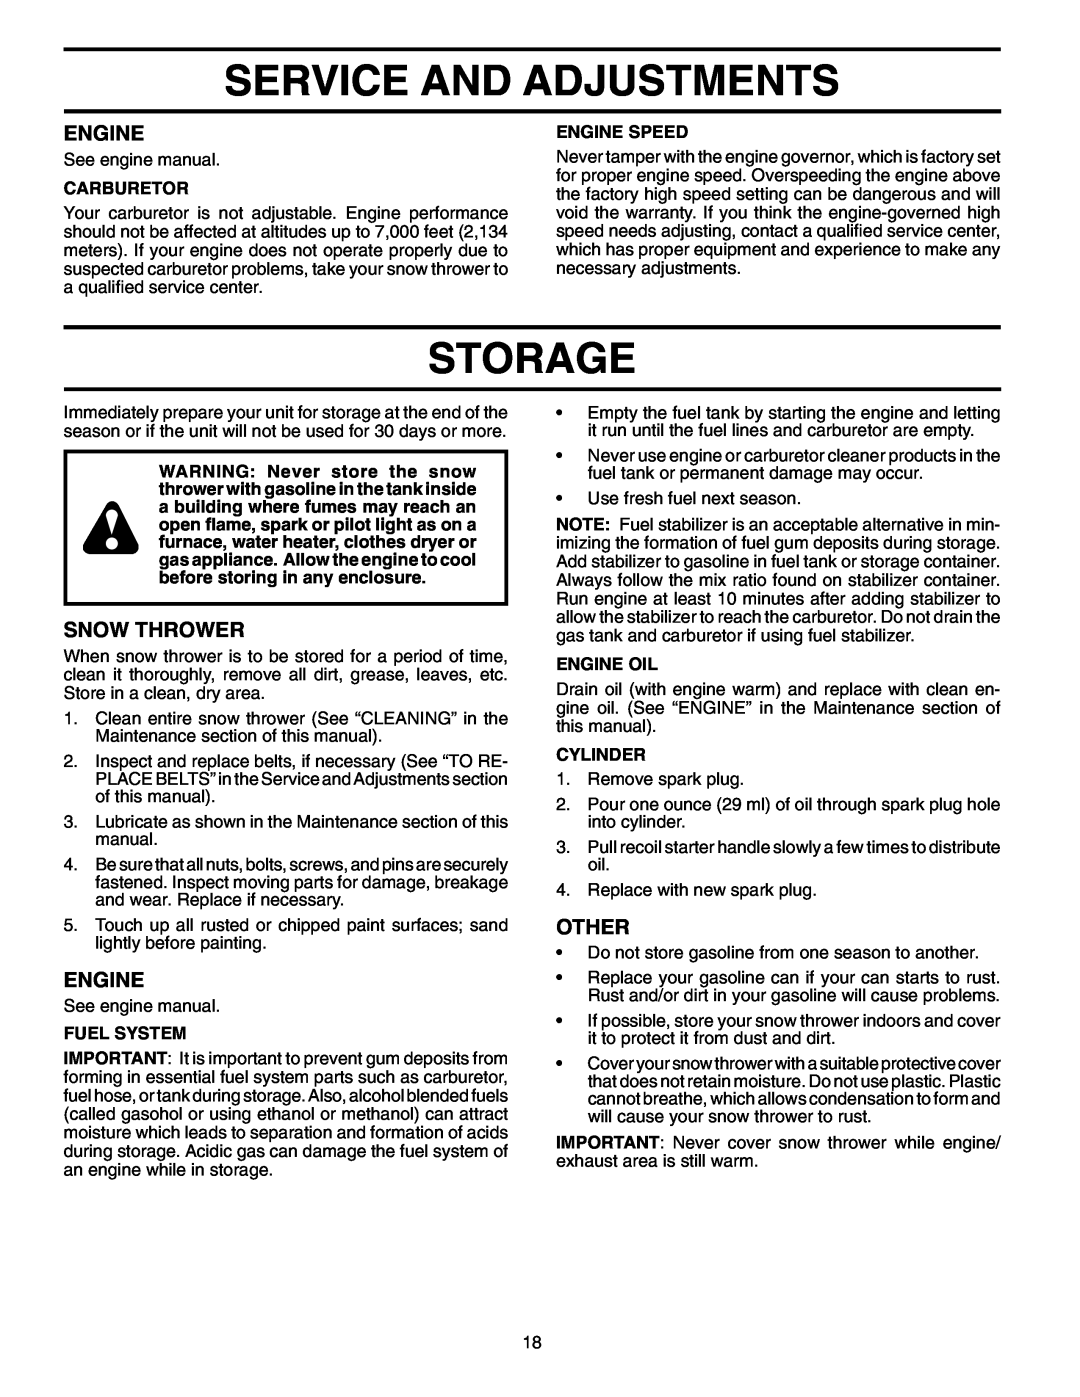 Poulan 96192000400, 199342 owner manual Storage, Other, Service And Adjustments, Engine, Snow Thrower 